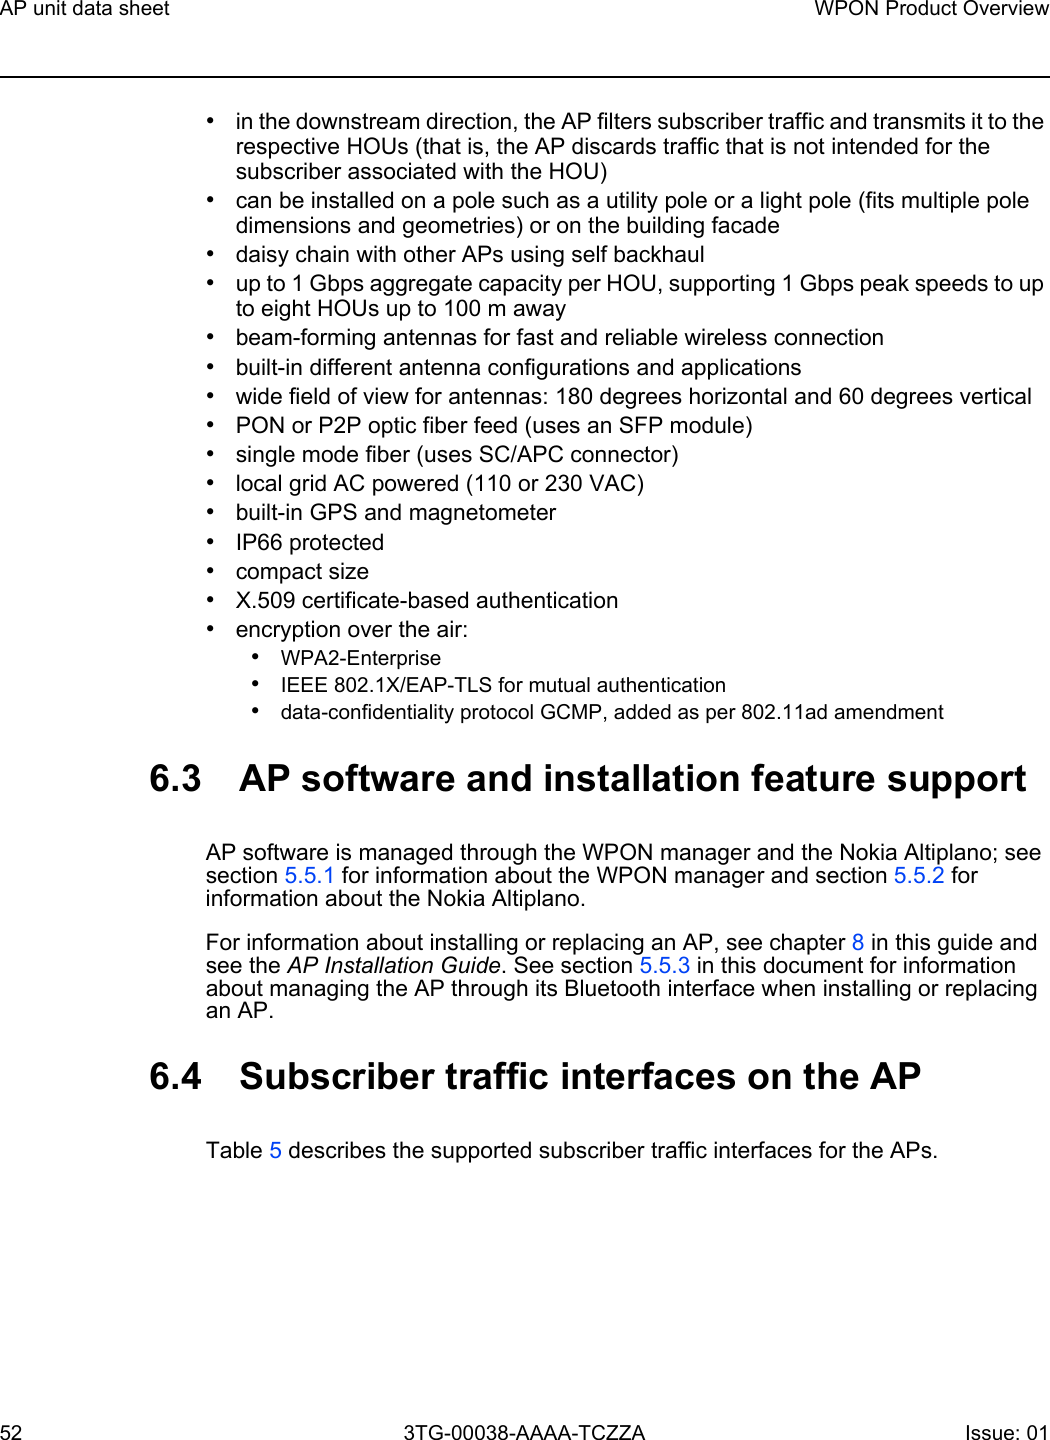 AP unit data sheet52WPON Product Overview3TG-00038-AAAA-TCZZA Issue: 01 •in the downstream direction, the AP filters subscriber traffic and transmits it to the respective HOUs (that is, the AP discards traffic that is not intended for the subscriber associated with the HOU)•can be installed on a pole such as a utility pole or a light pole (fits multiple pole dimensions and geometries) or on the building facade•daisy chain with other APs using self backhaul •up to 1 Gbps aggregate capacity per HOU, supporting 1 Gbps peak speeds to up to eight HOUs up to 100 m away •beam-forming antennas for fast and reliable wireless connection•built-in different antenna configurations and applications•wide field of view for antennas: 180 degrees horizontal and 60 degrees vertical•PON or P2P optic fiber feed (uses an SFP module)•single mode fiber (uses SC/APC connector)•local grid AC powered (110 or 230 VAC)•built-in GPS and magnetometer•IP66 protected•compact size•X.509 certificate-based authentication•encryption over the air:•WPA2-Enterprise•IEEE 802.1X/EAP-TLS for mutual authentication•data-confidentiality protocol GCMP, added as per 802.11ad amendment6.3 AP software and installation feature supportAP software is managed through the WPON manager and the Nokia Altiplano; see section 5.5.1 for information about the WPON manager and section 5.5.2 for information about the Nokia Altiplano.For information about installing or replacing an AP, see chapter 8 in this guide and see the AP Installation Guide. See section 5.5.3 in this document for information about managing the AP through its Bluetooth interface when installing or replacing an AP.6.4 Subscriber traffic interfaces on the APTable 5 describes the supported subscriber traffic interfaces for the APs. 